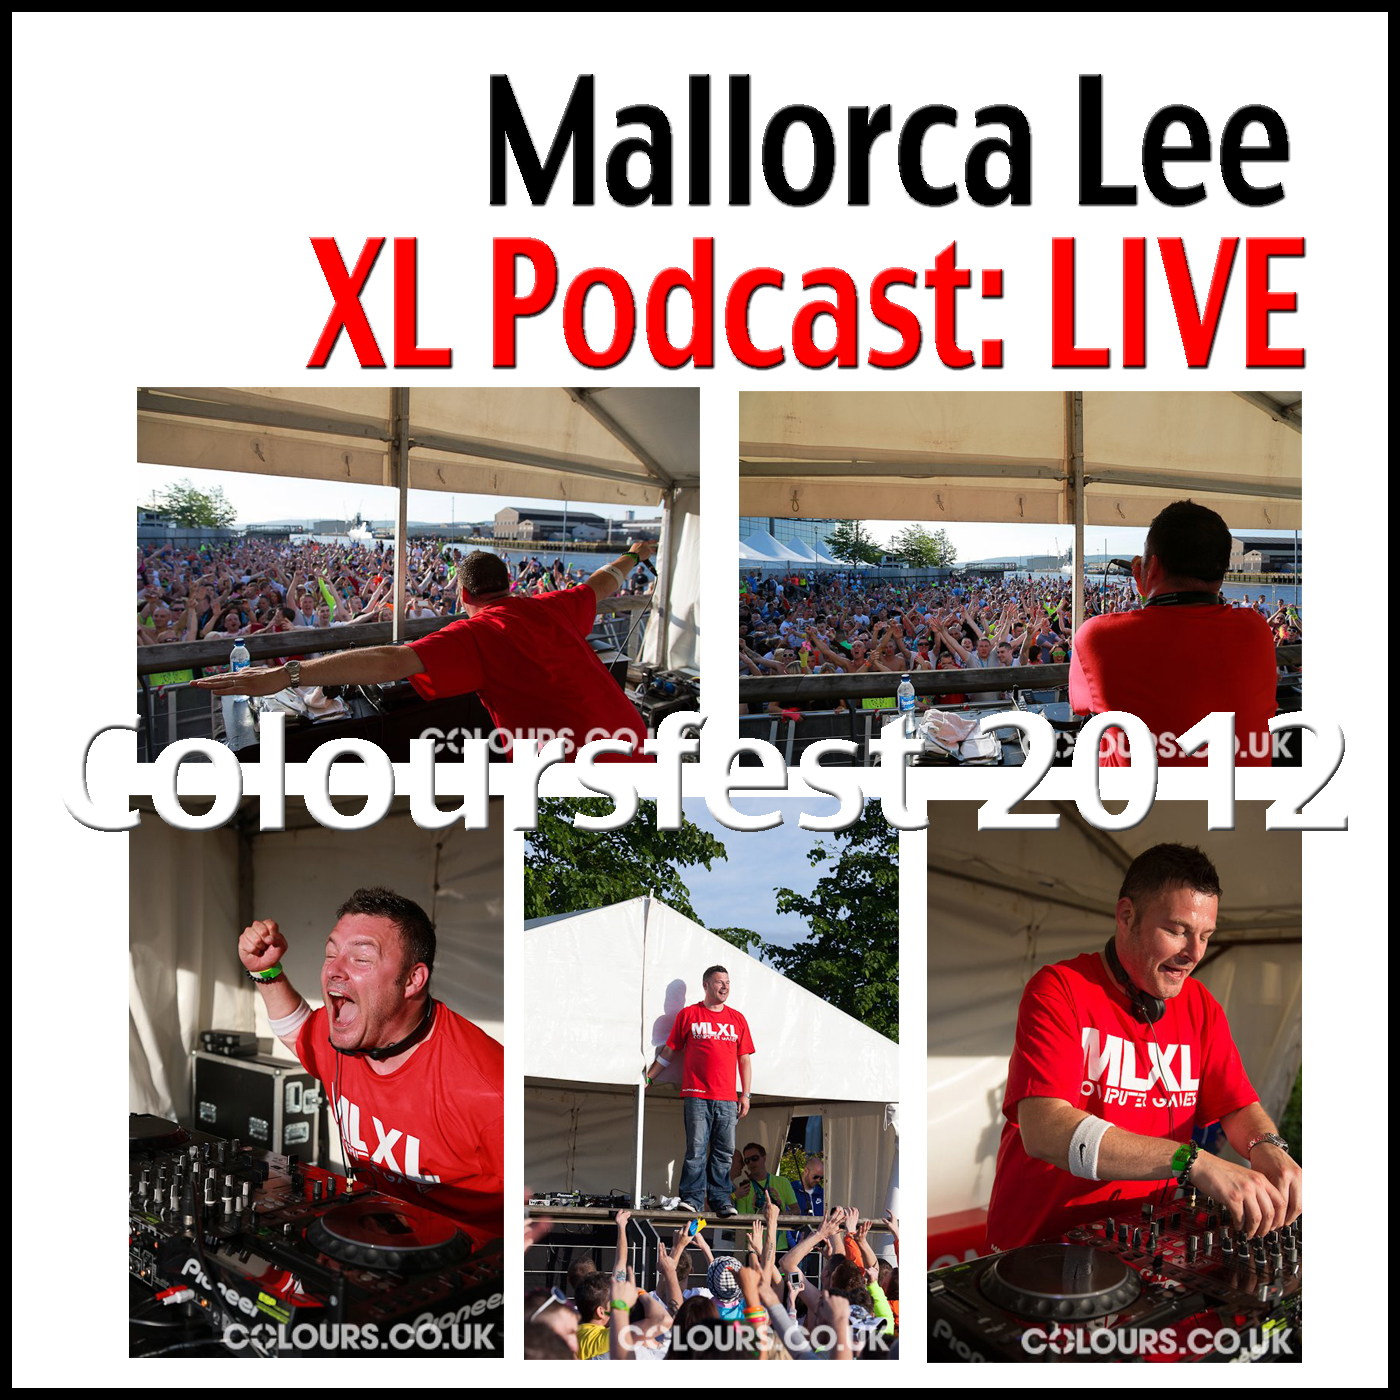 Mallorca Lee's XL Podcast ep.19 LIVE from Coloursfest 2012